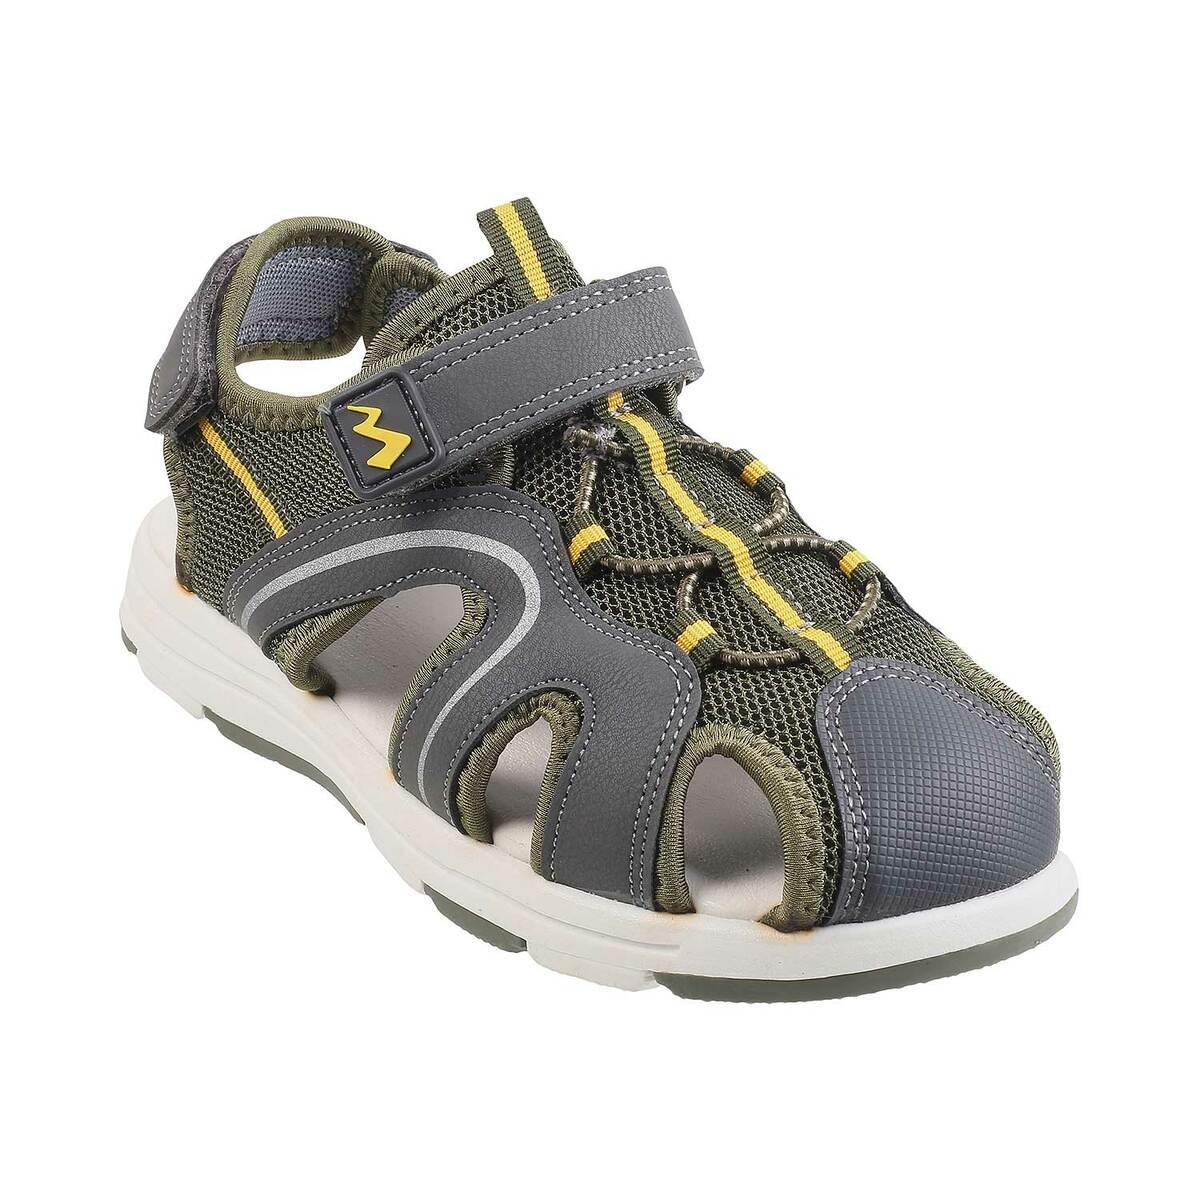 Summer Baby Sandals Infant Boys Soft sole Non-Slip First Walkers Shoes Kids  Water Shoes - Walmart.com